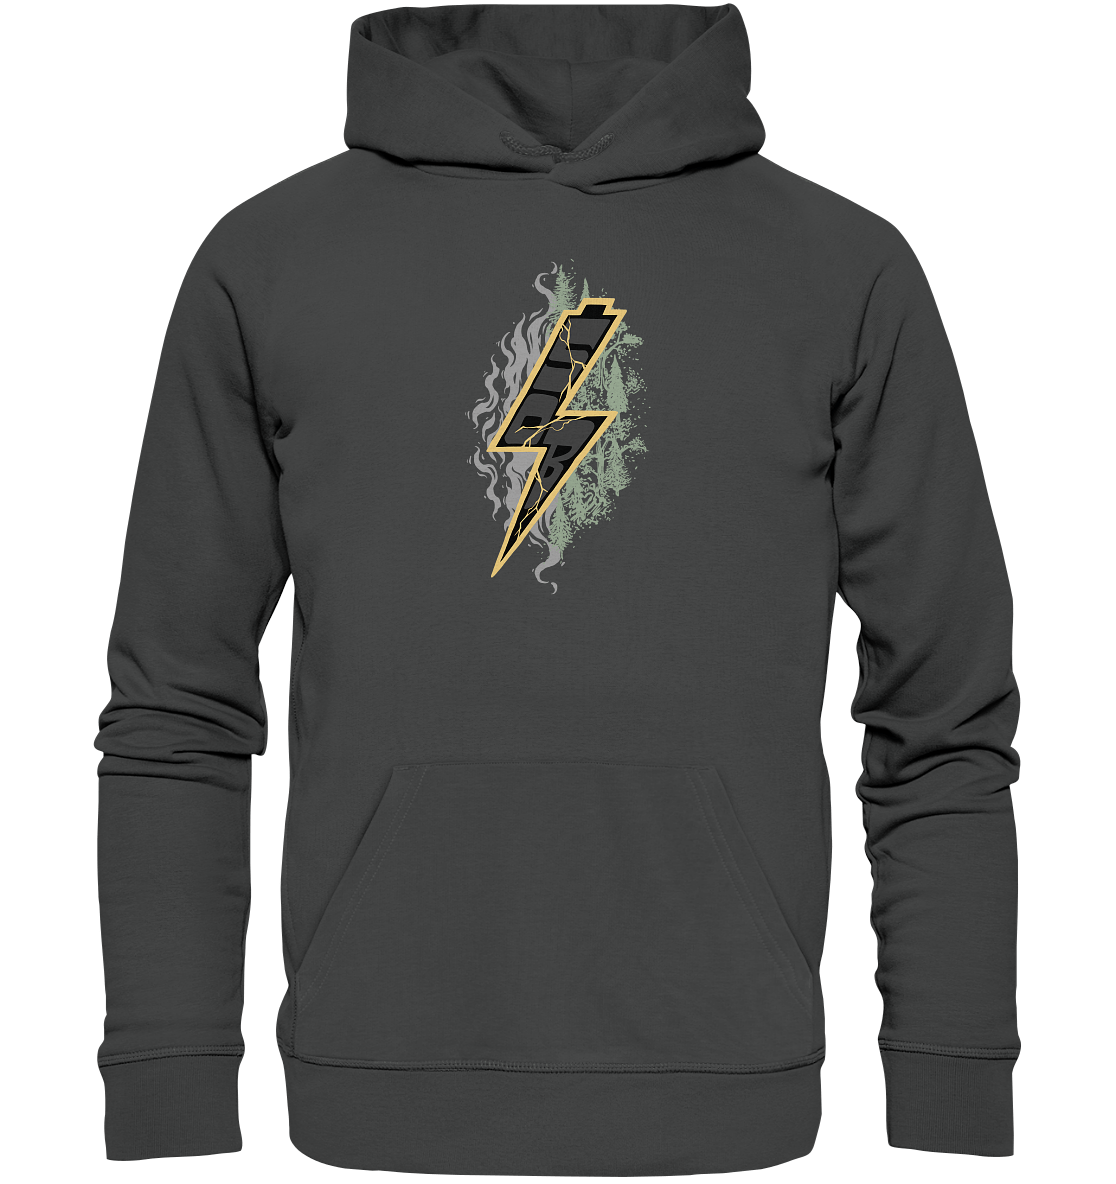 Sons of Battery® - E-MTB Brand & Community Hoodies Anthracite / XS Sob "Shred or Alive" Front - Organic Basic Hoodie (Flip Label) E-Bike-Community